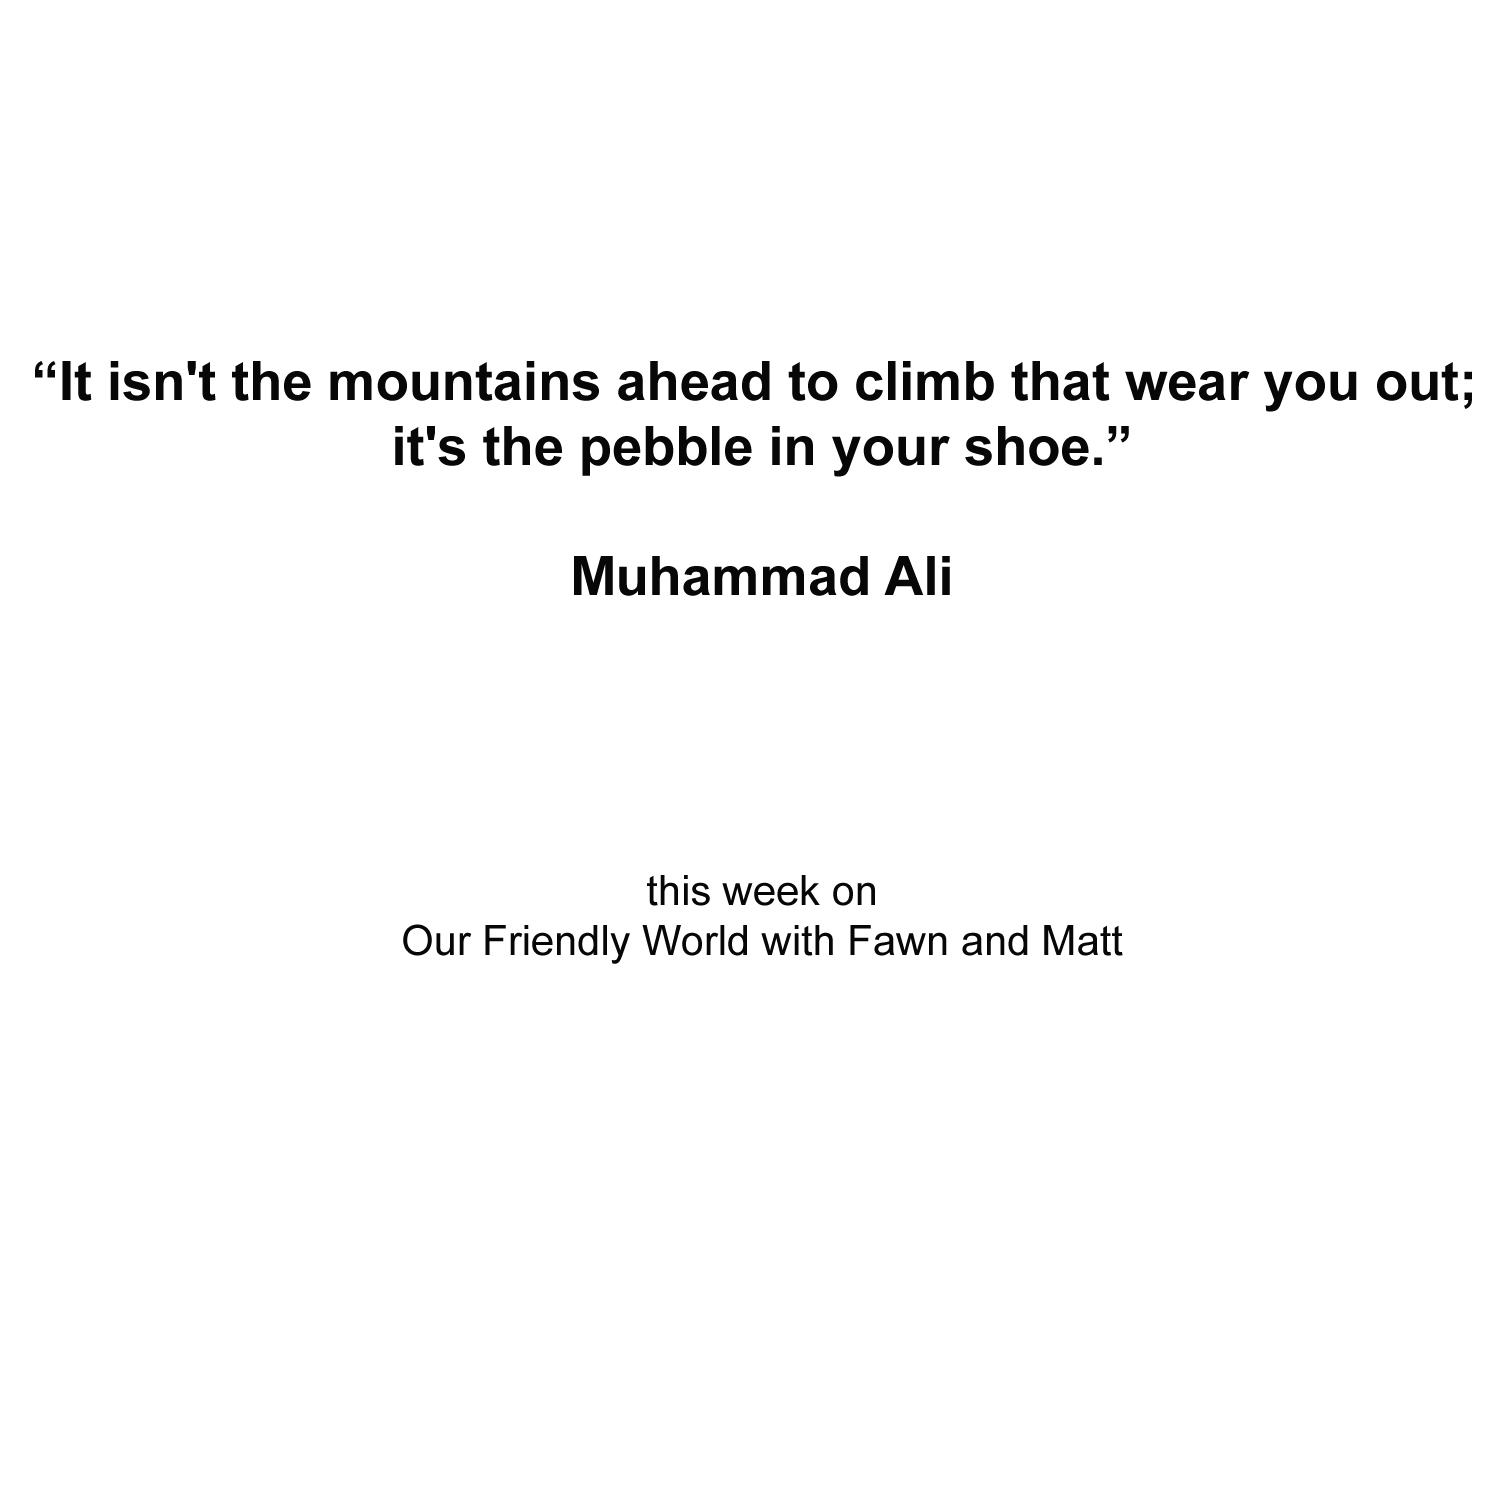 "Friendship and the Wisdom of Muhammad Ali: Navigating Life's Pebbles"